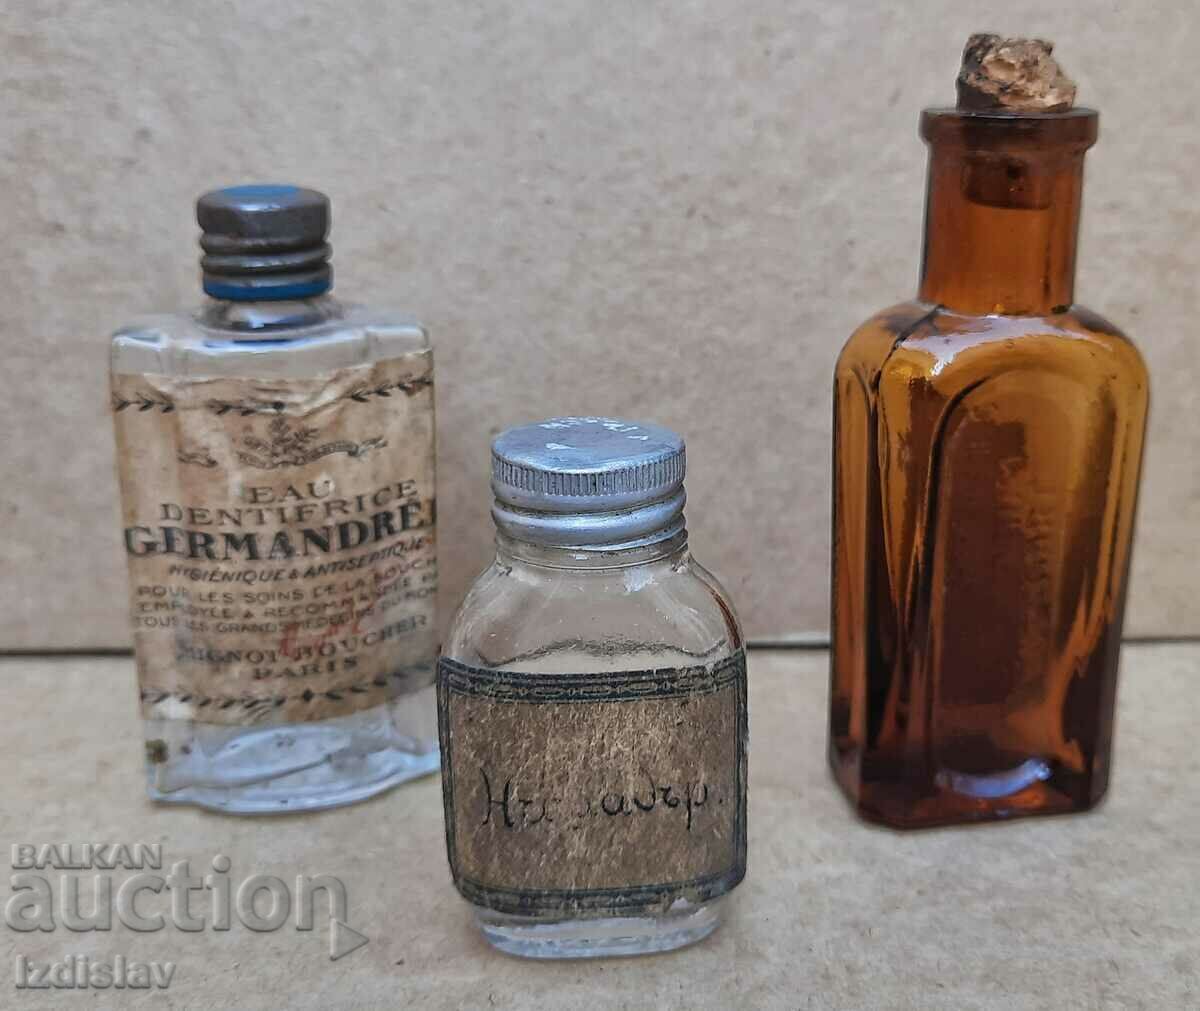 Lot of three old small bottles